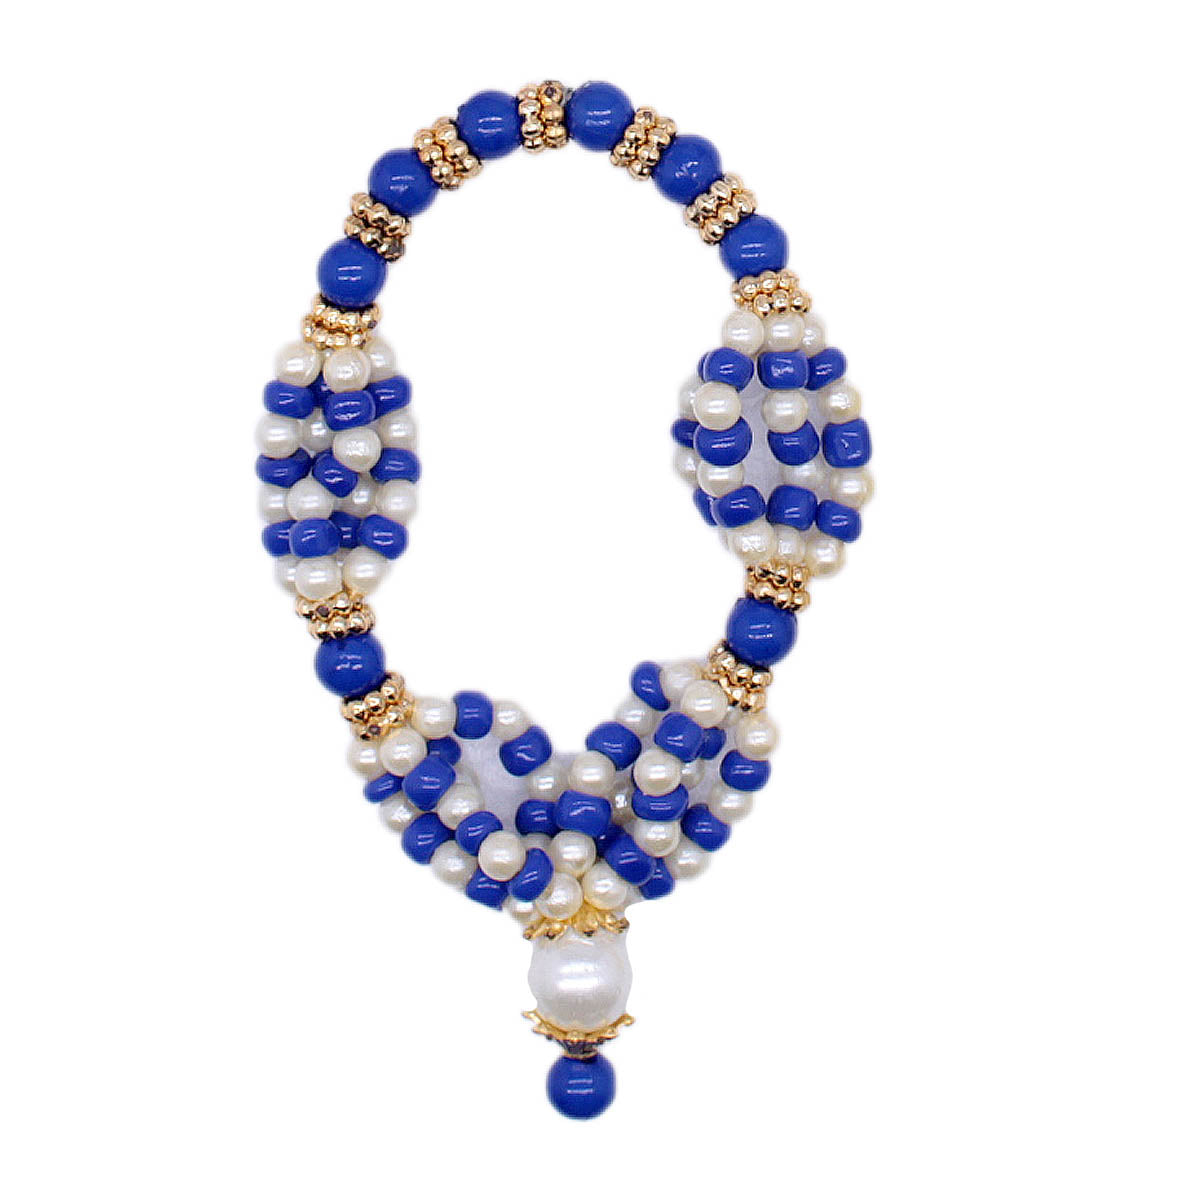 Blue And White Moti Decorated Haar For Laddu Gopal